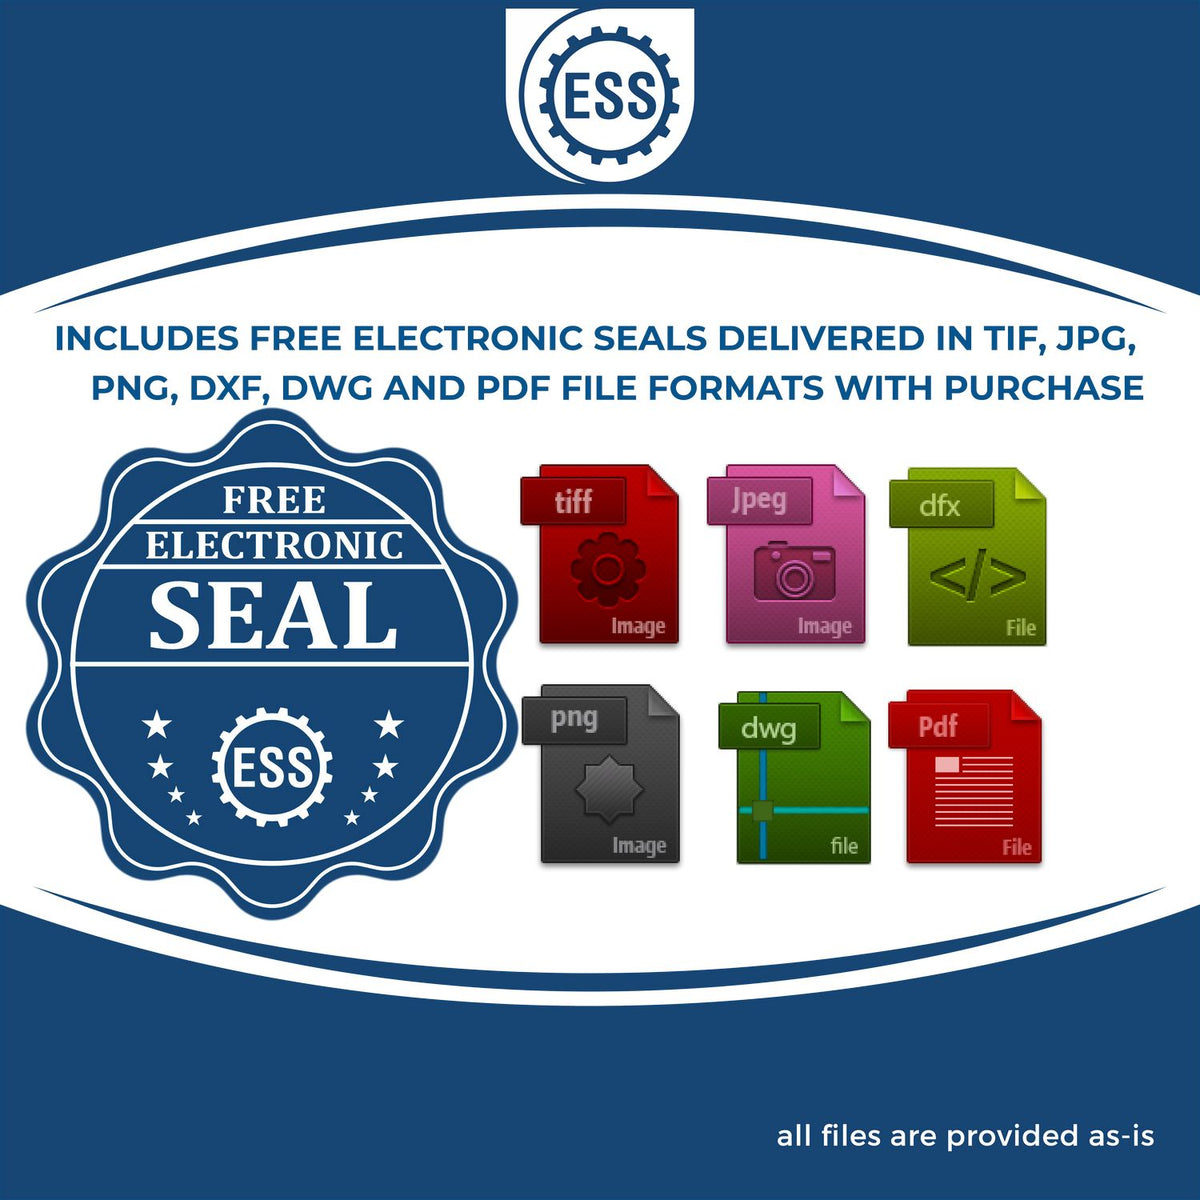 An infographic for the free electronic seal for the Premium MaxLight Pre-Inked Ohio Geology Stamp illustrating the different file type icons such as DXF, DWG, TIF, JPG and PNG.